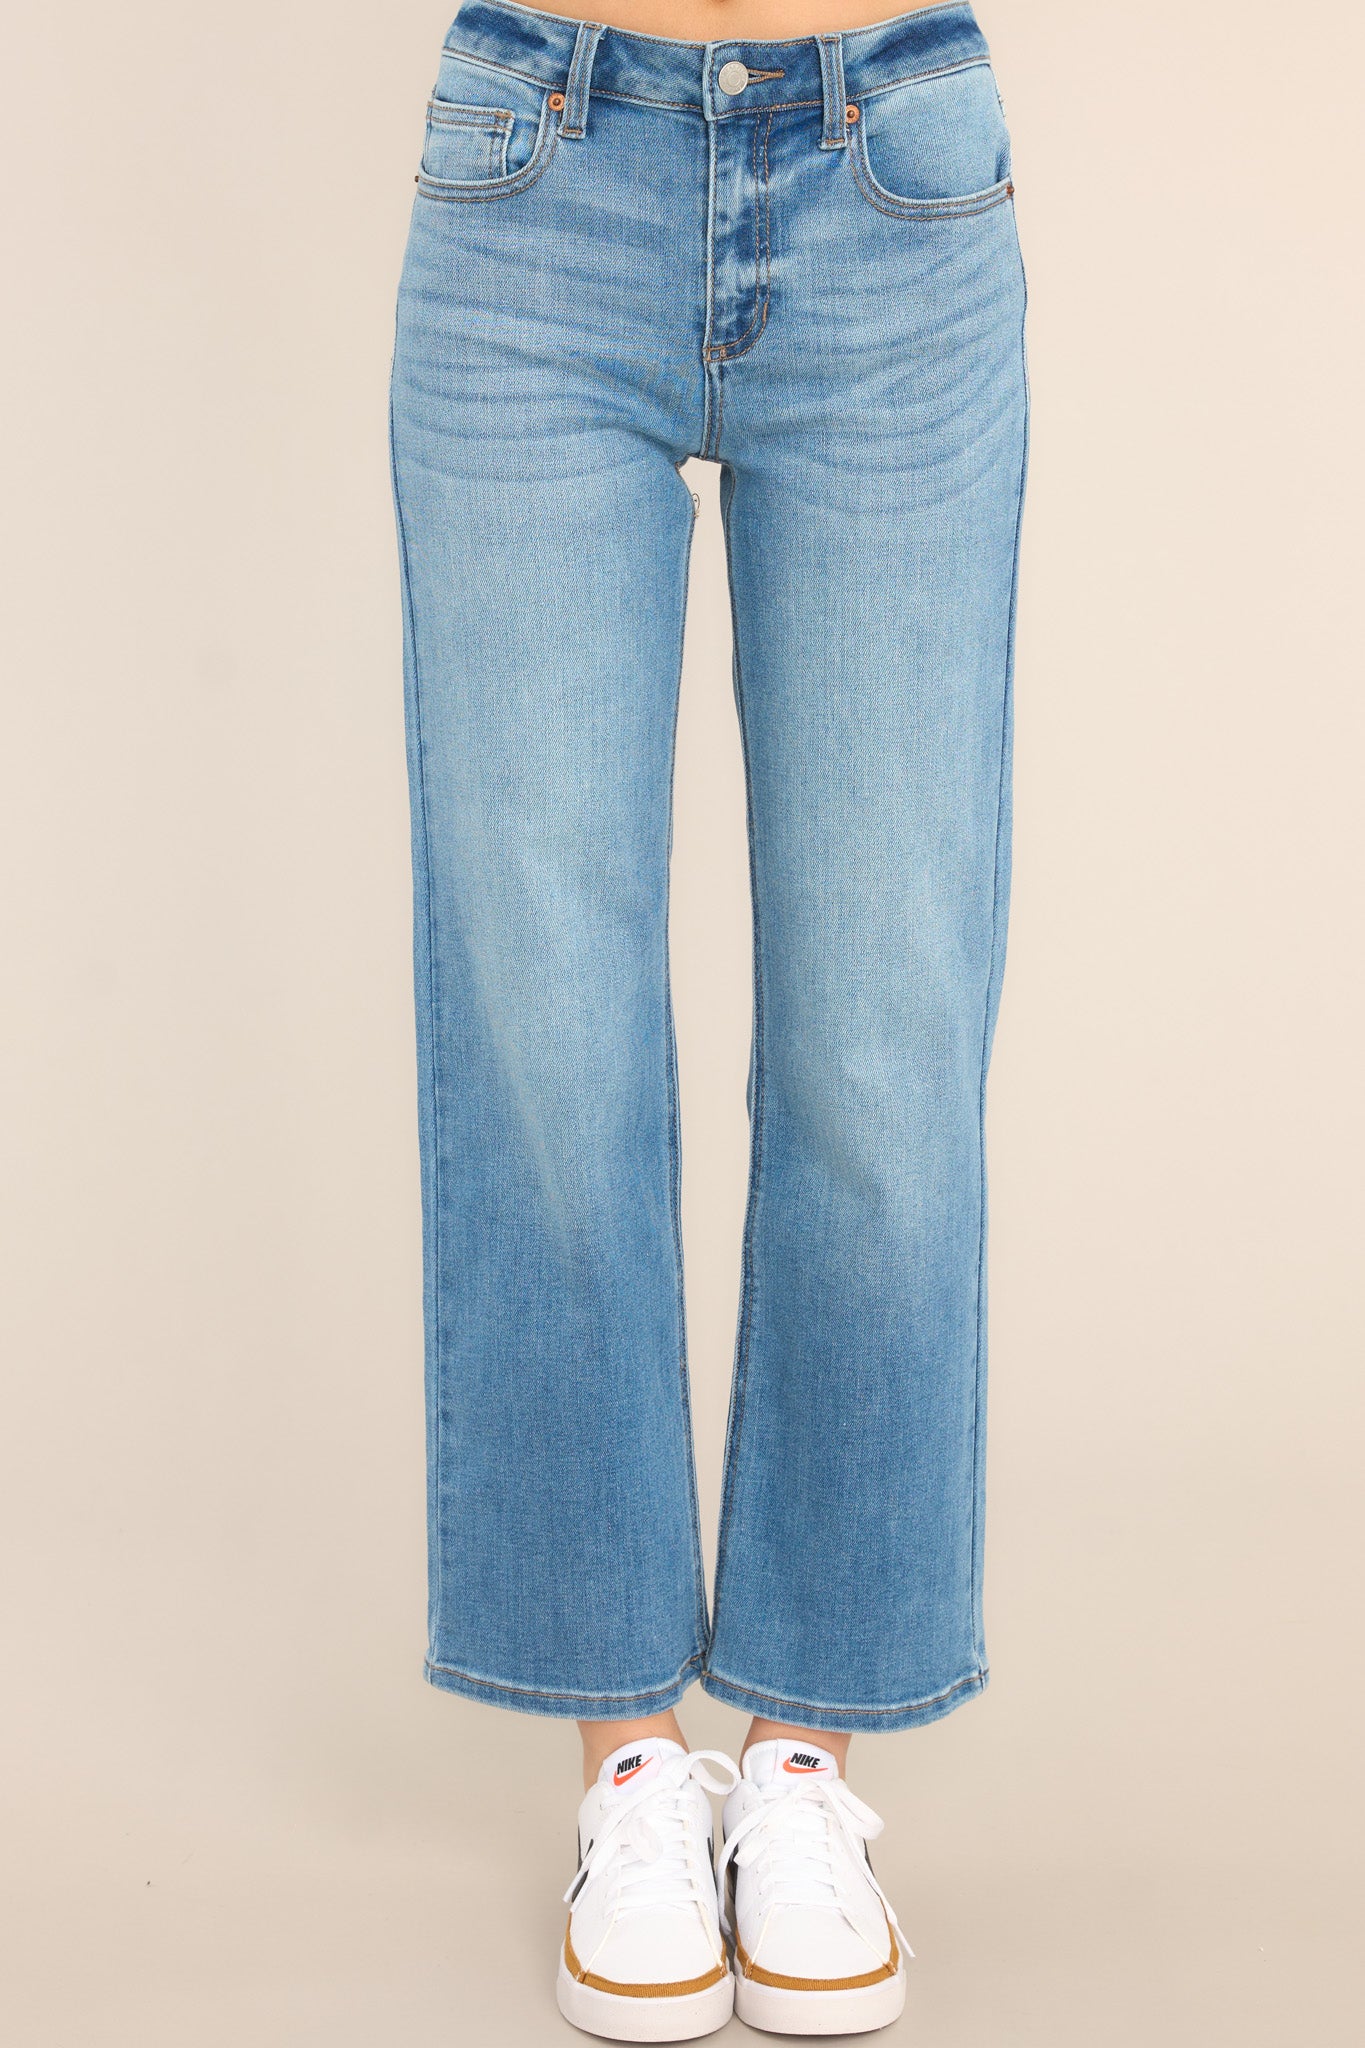 Front view of these jeans that feature a high waist design, a zipper and button closure, functional belt loops and pockets, and a straight leg.